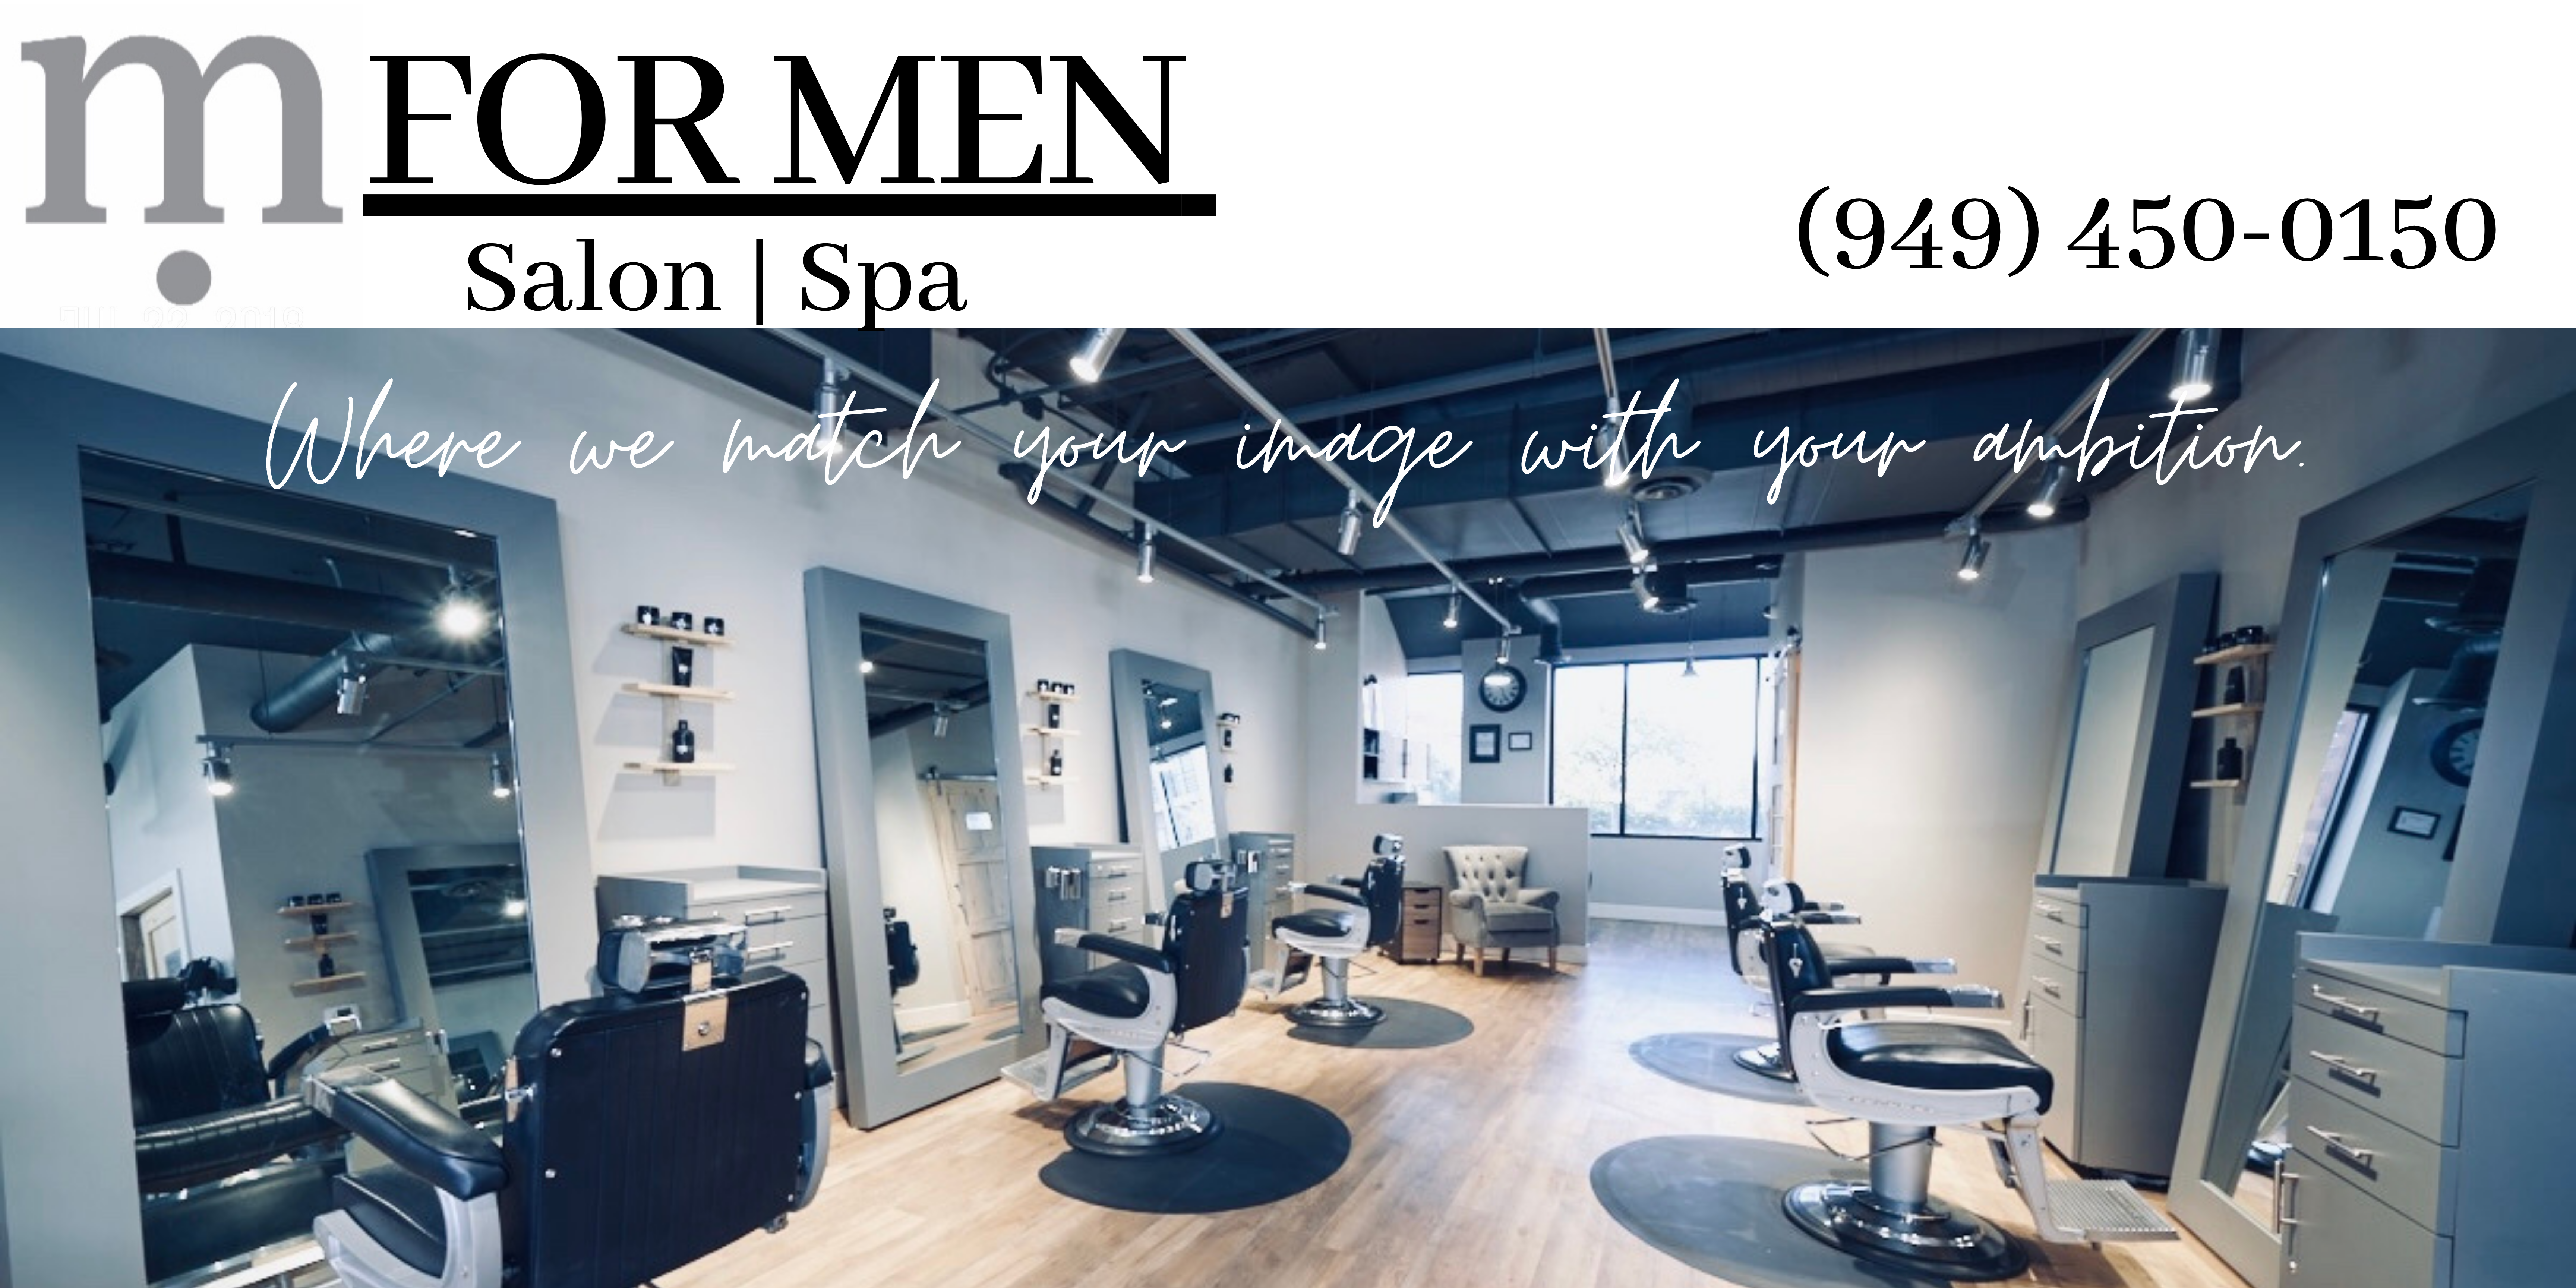 Mens salon near me in Lake Forest California 92630. FOR MEN Salon and Spa located at Lake Forest Boulevard and Rockfield at the center of the El Toro Y.